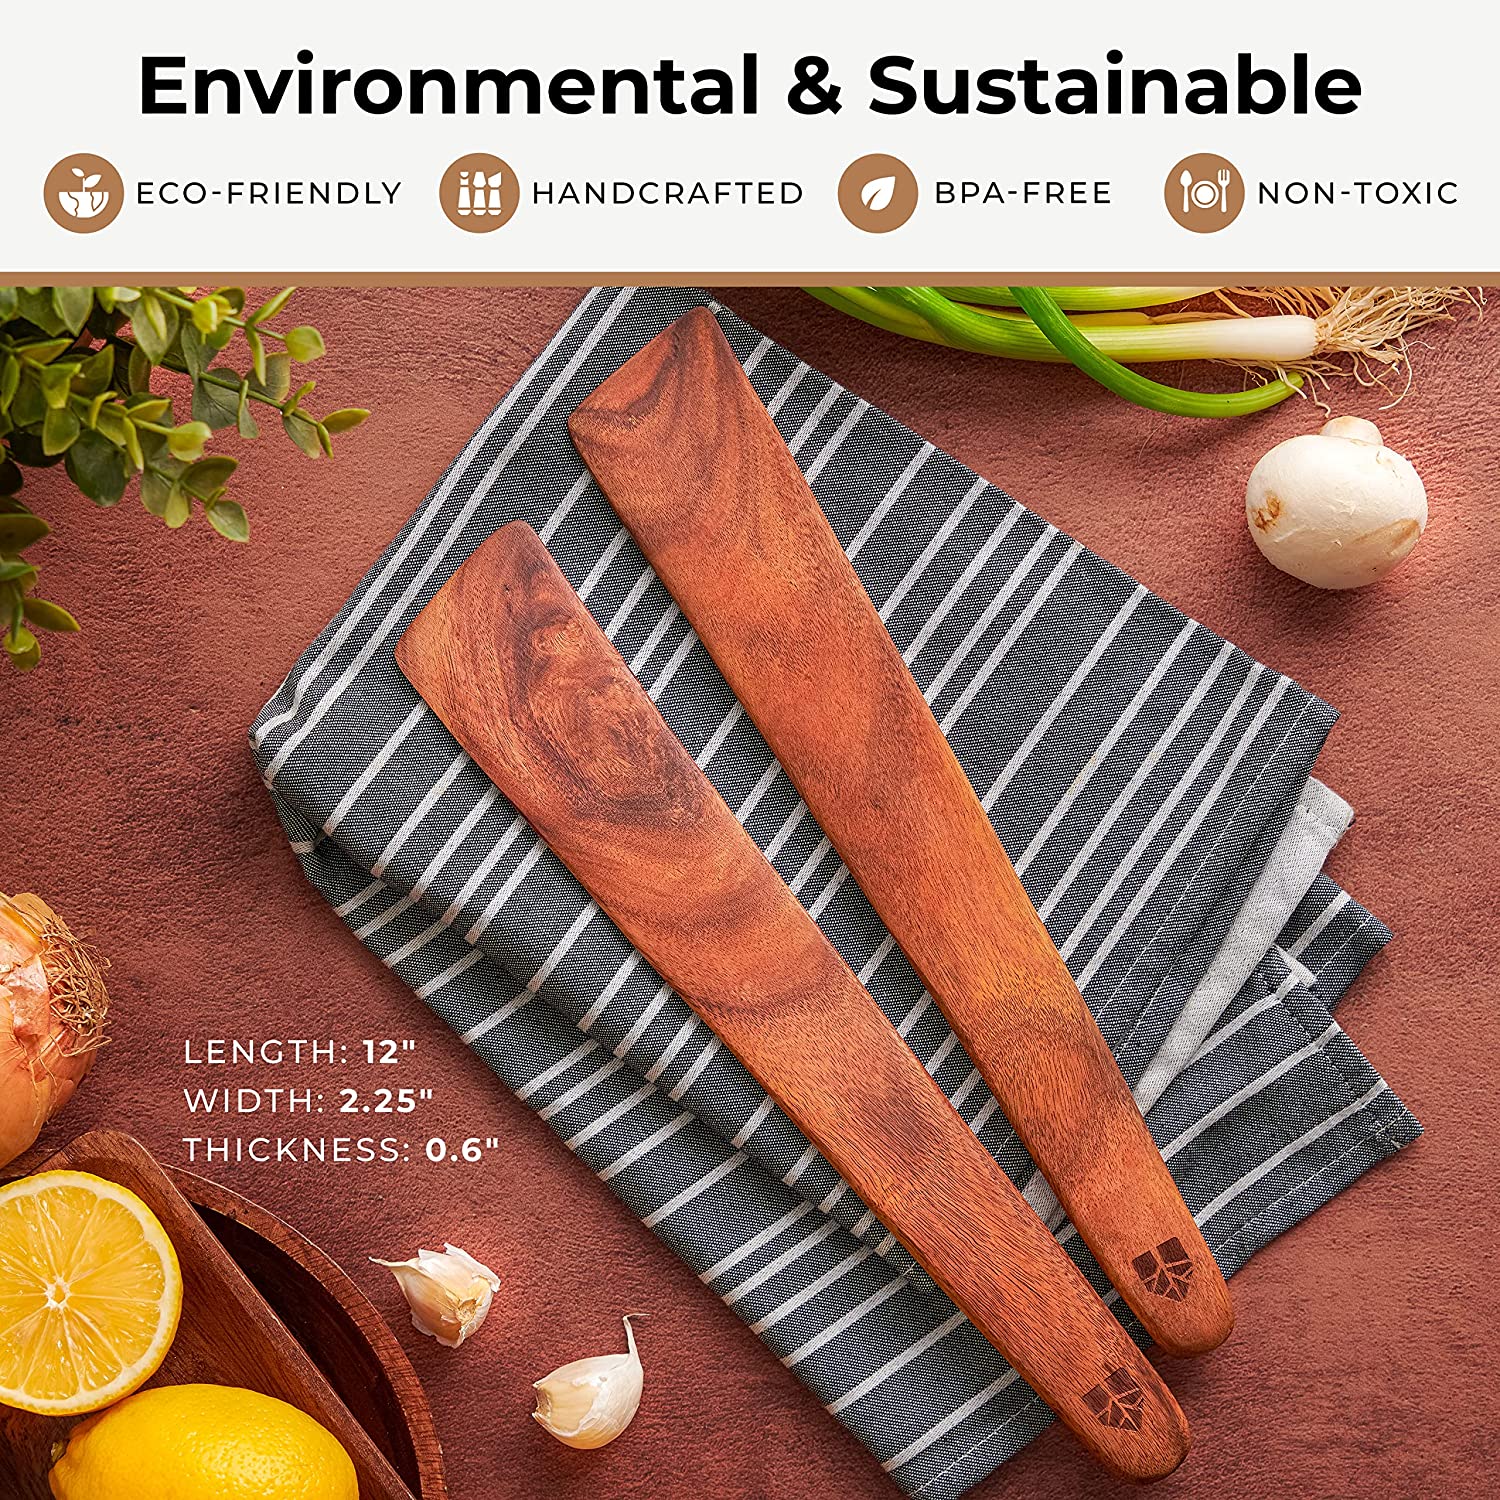 Wooden Spoons for Cooking, 8bPcs Teak Wood Cooking Utensil Set –  Woodenhouse Lifelong Quality